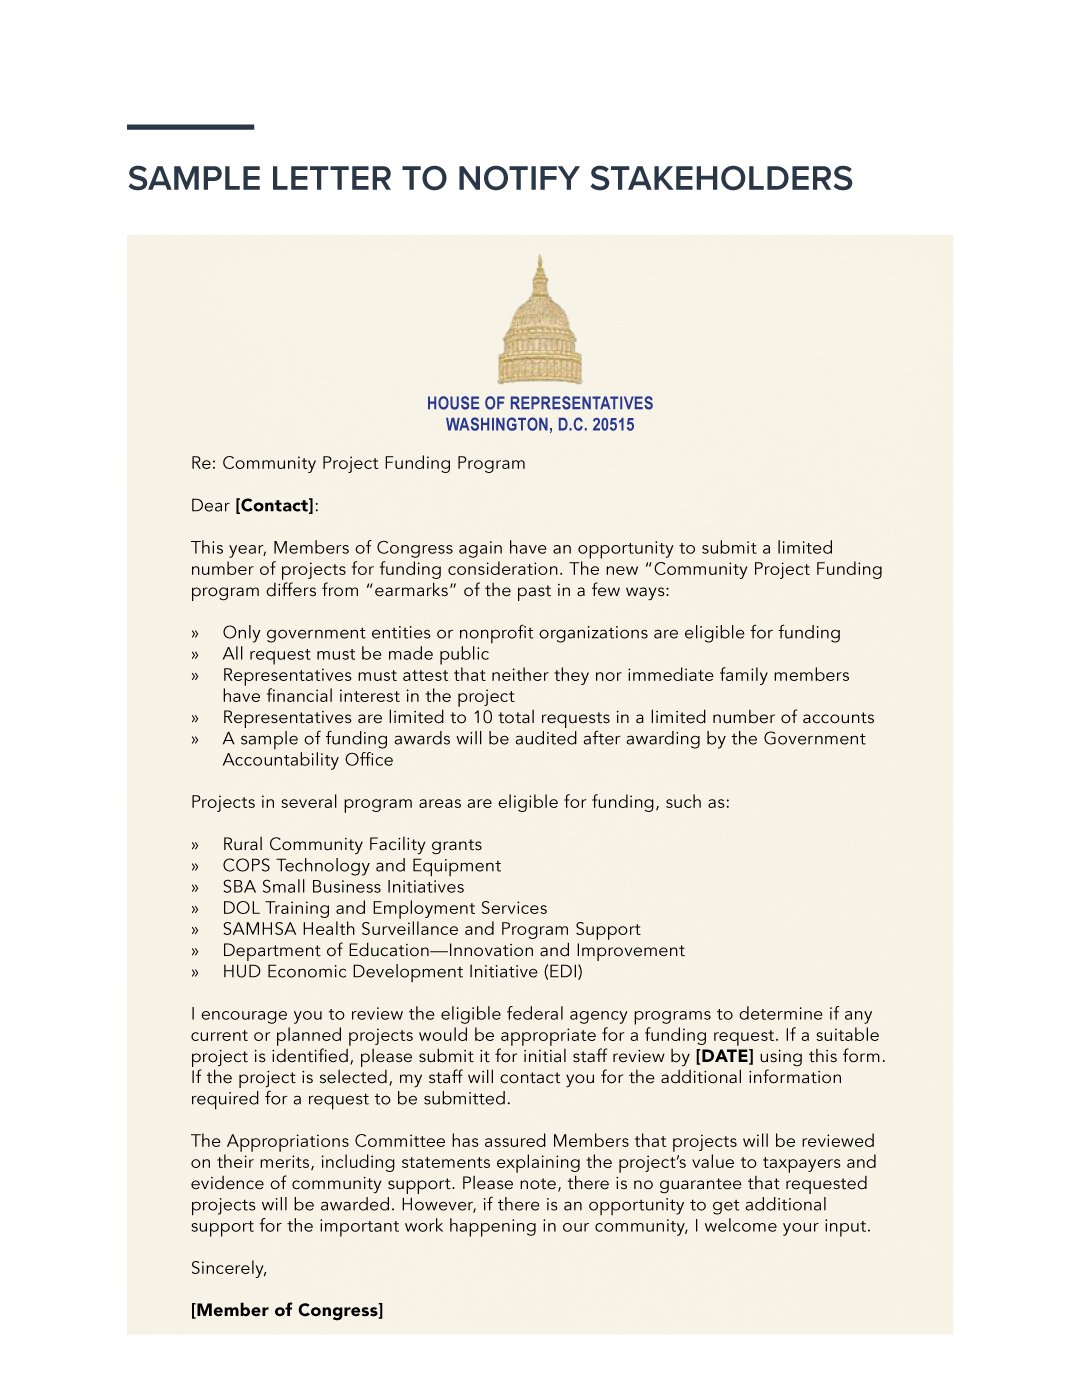 Sample Letter to Notify Stakeholders